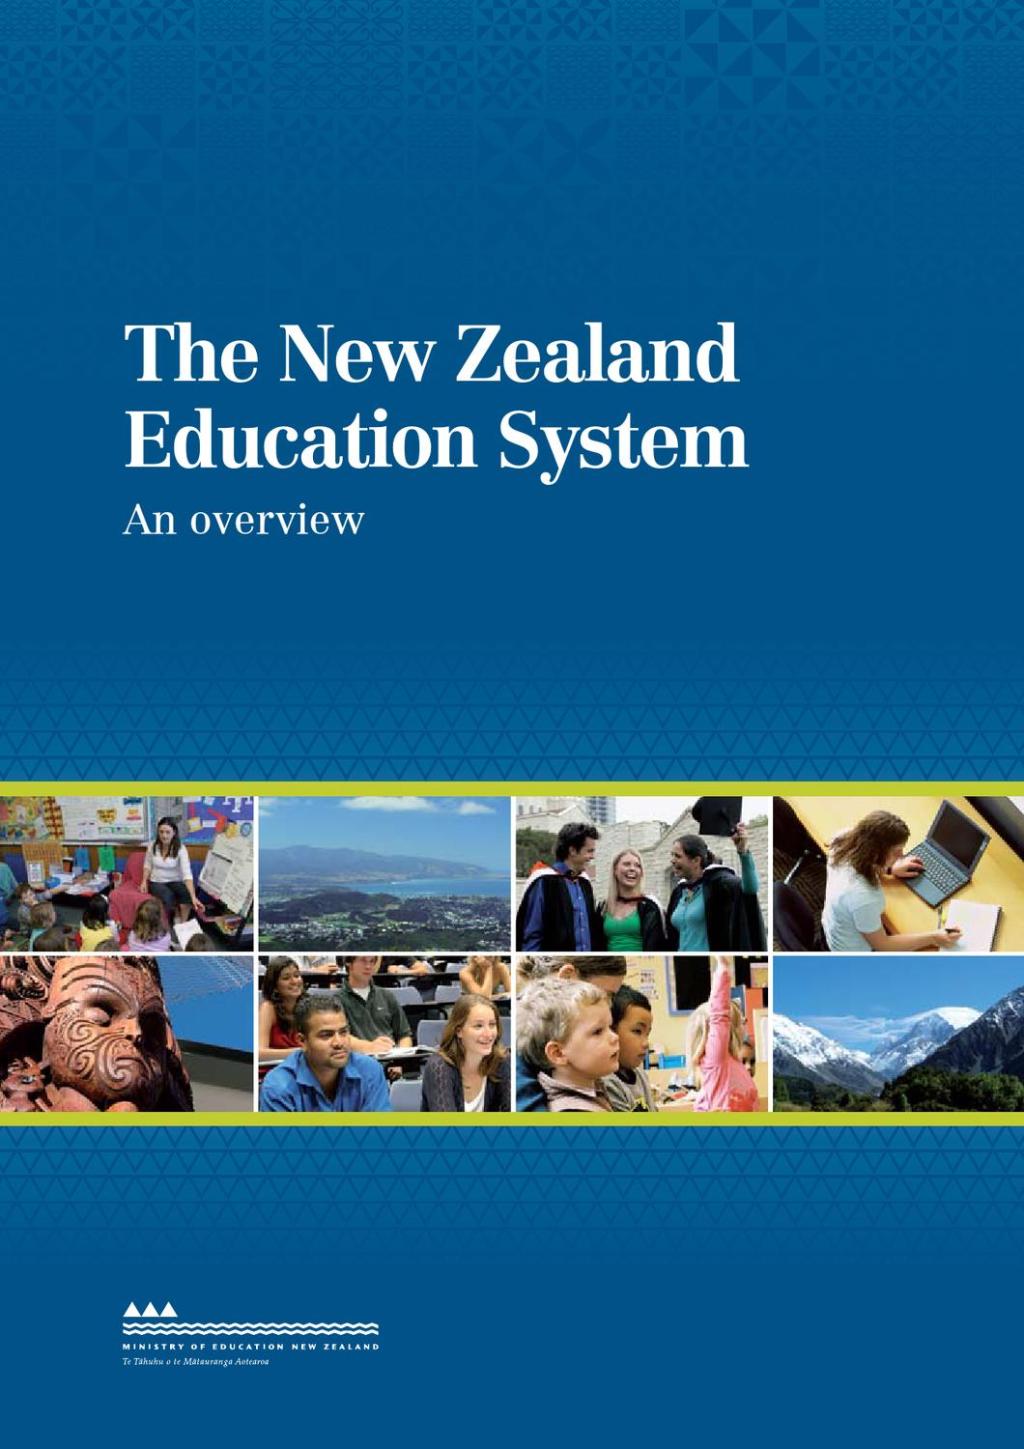 Discovering Education Innovation in New Zealand: A Journey of Self-Discovery and Adventure